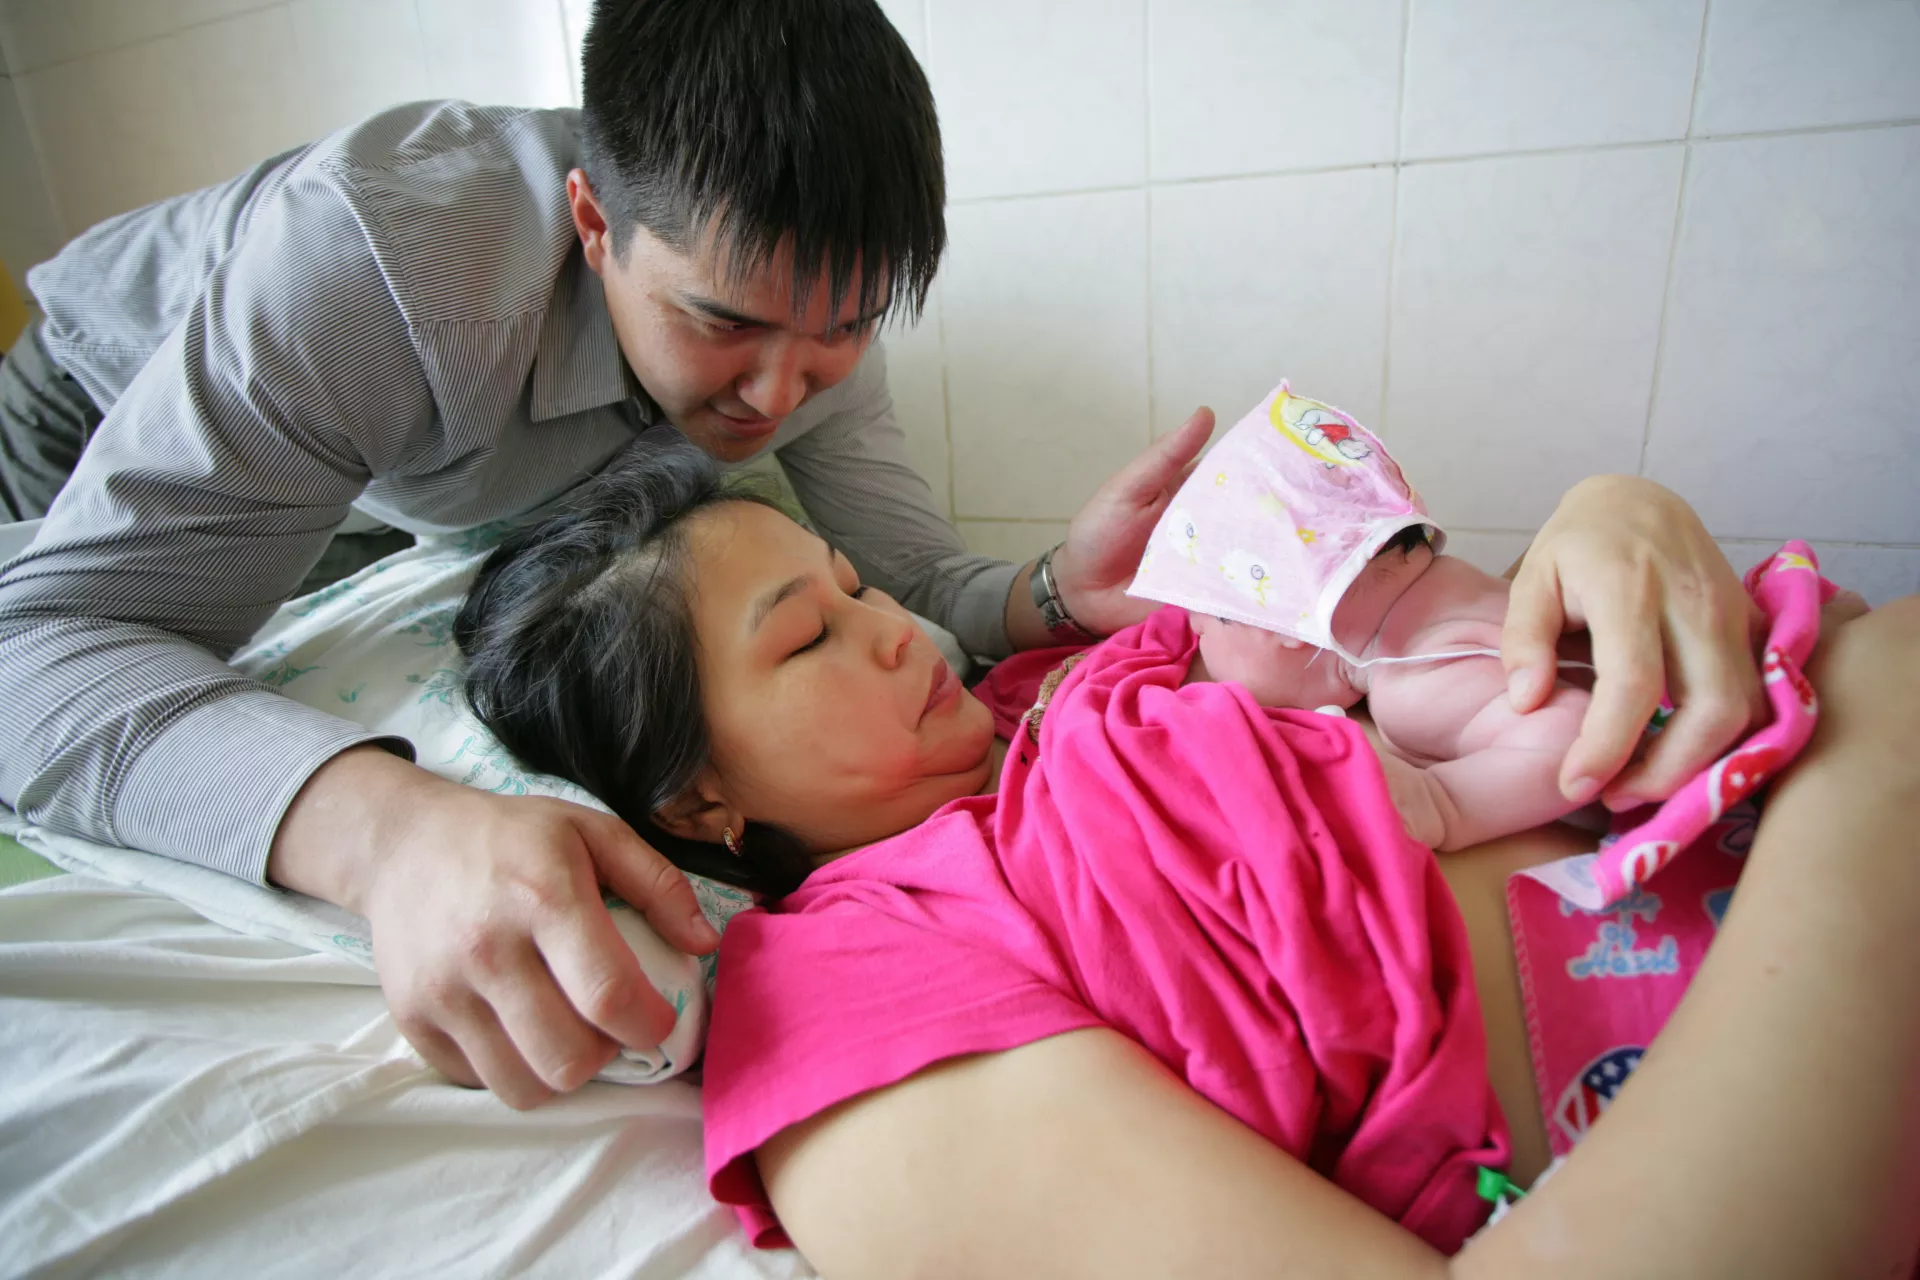 Capture the Moment: Early initiation of breastfeeding